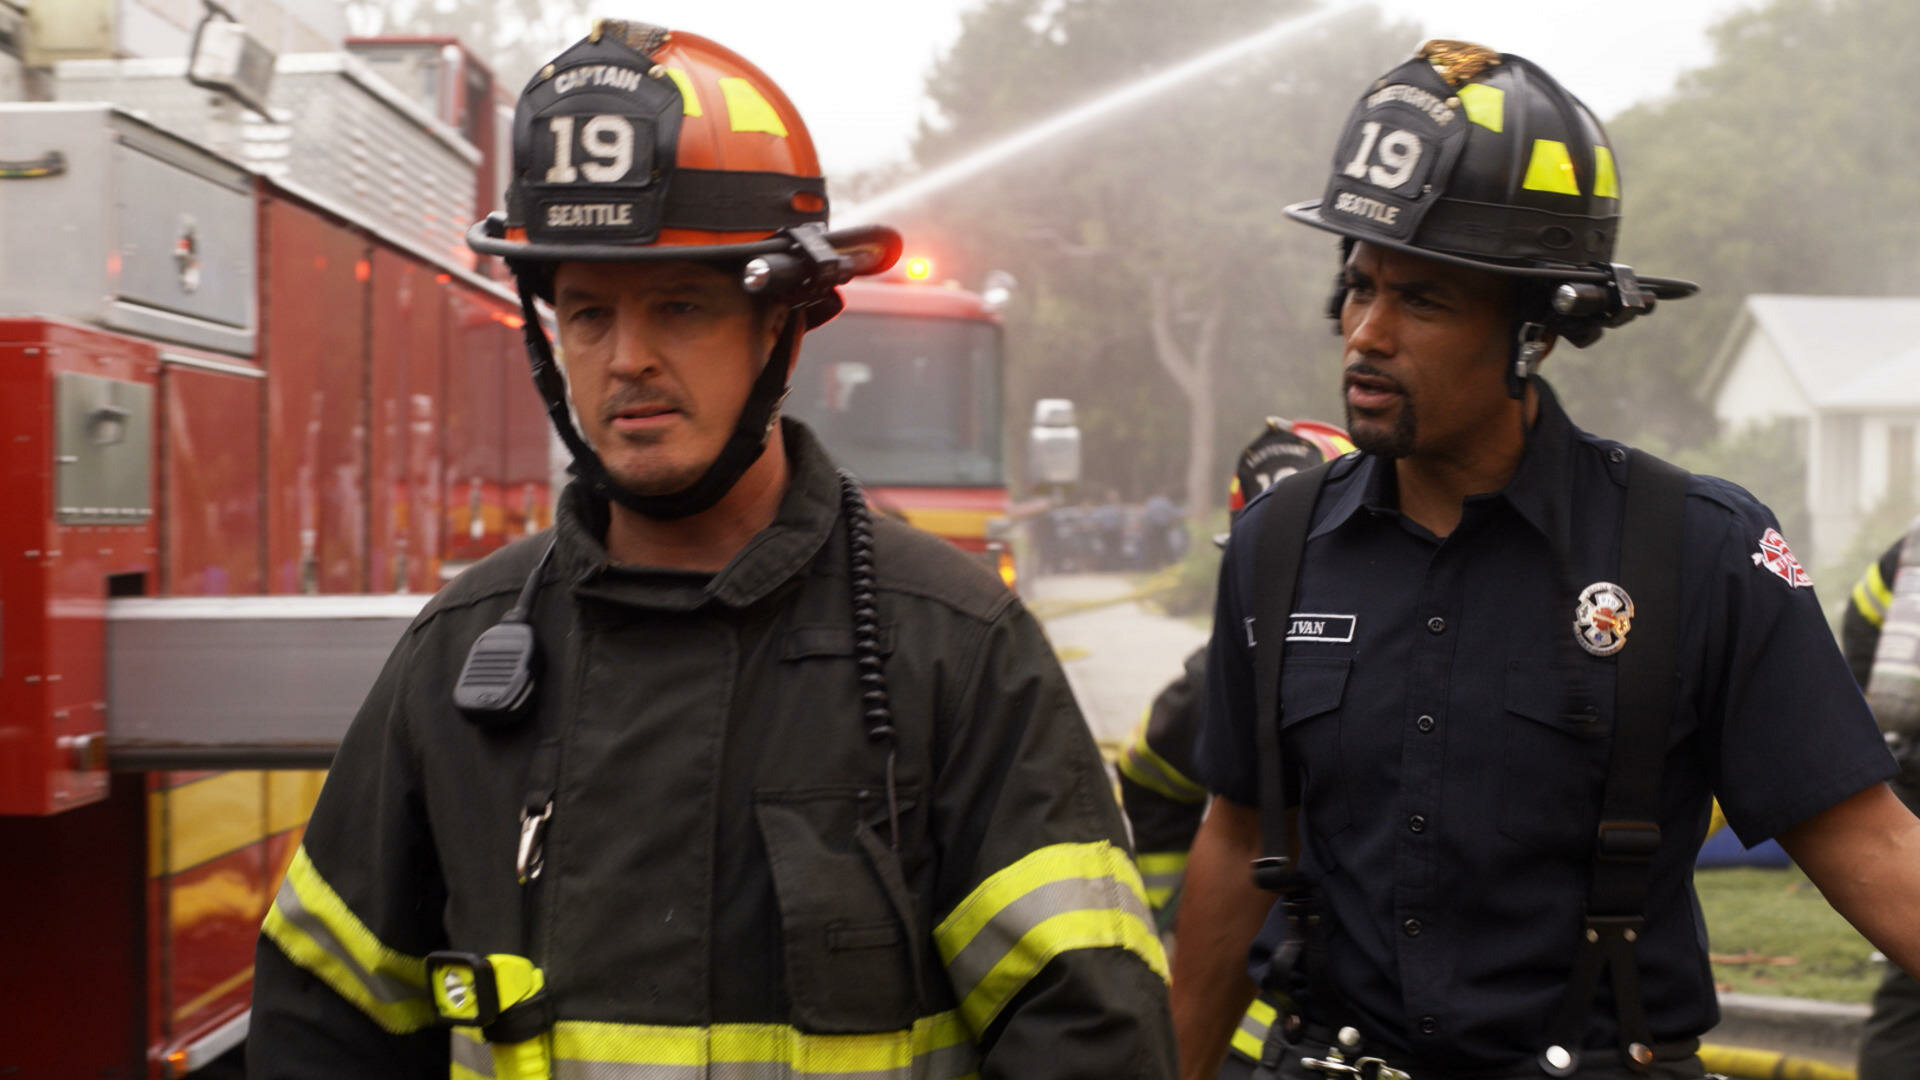 Station 19 — s05e05 — Things We Lost in the Fire